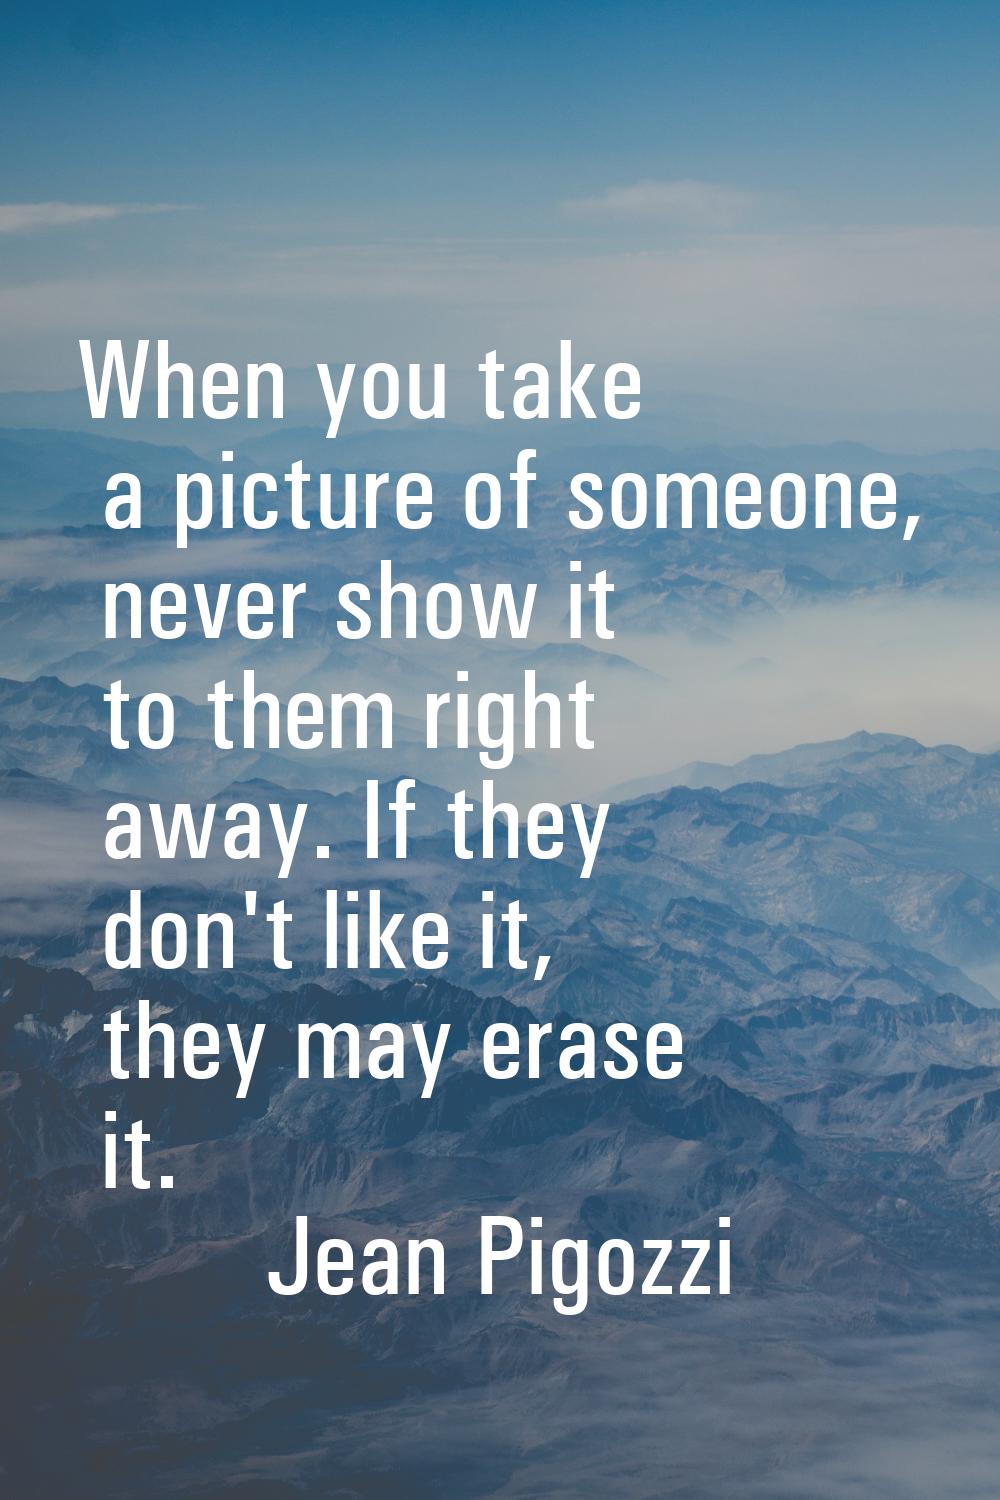 When you take a picture of someone, never show it to them right away. If they don't like it, they m